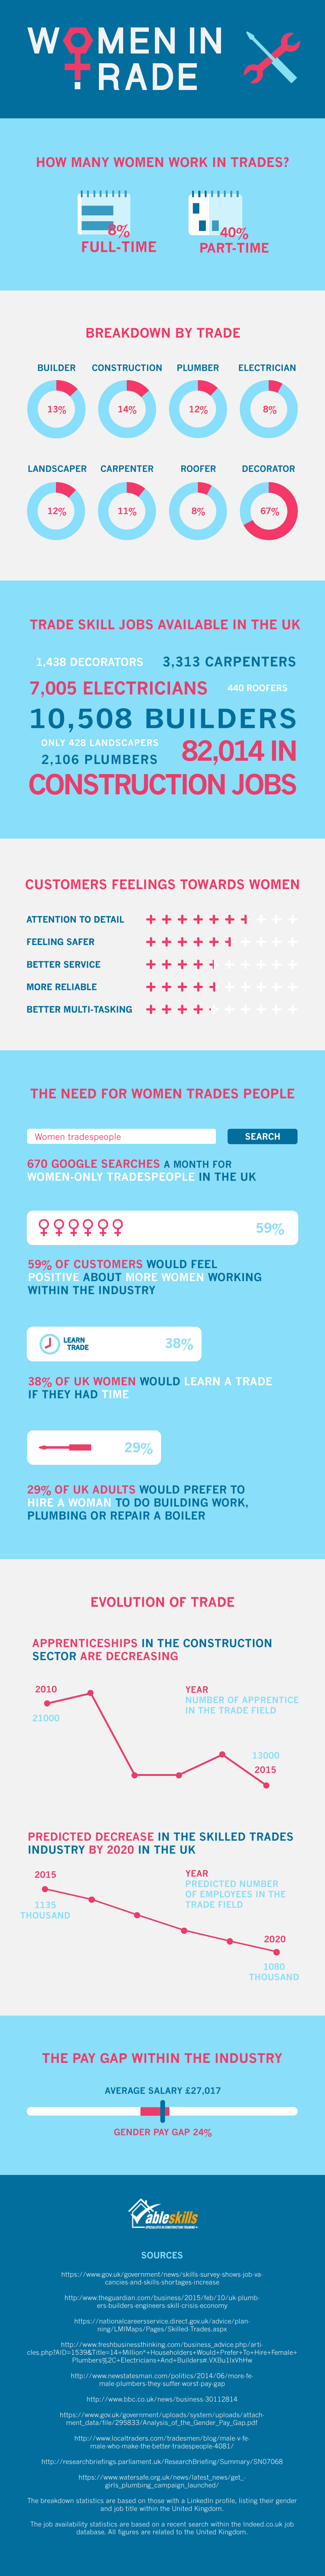 Women in Trade infographic